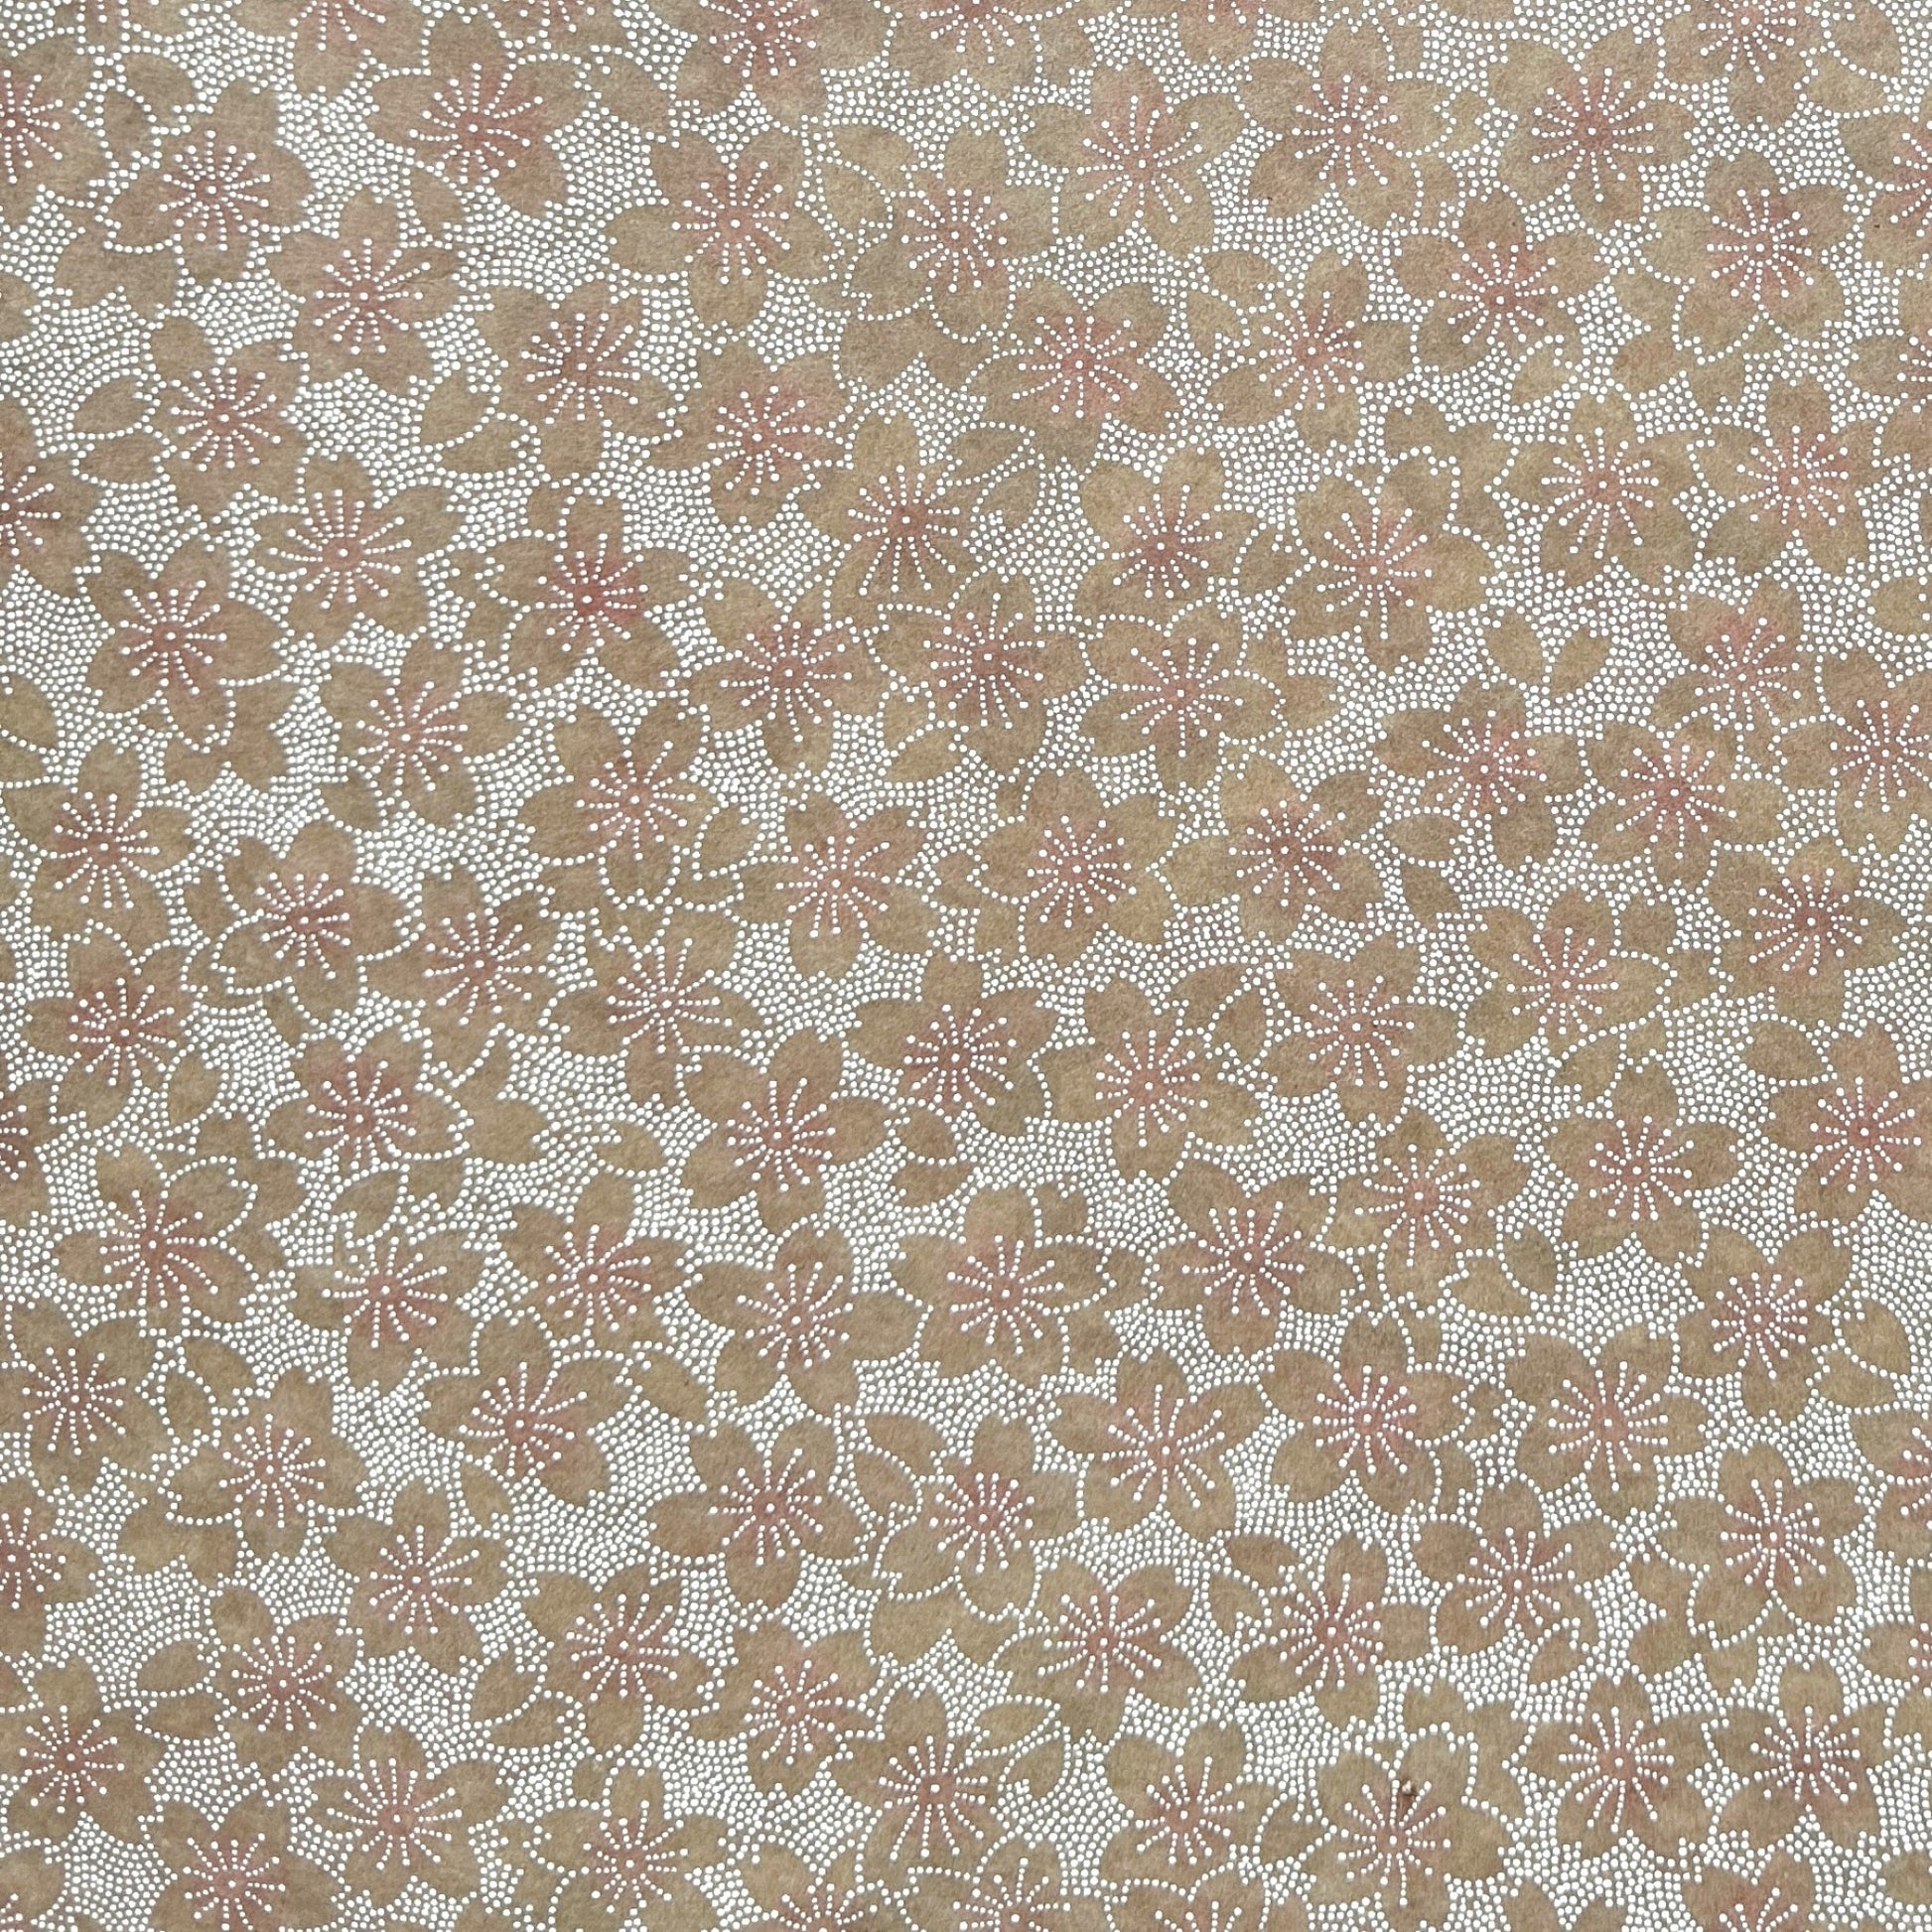 Japanese silkscreen chiyogami paper with a repeat pattern of cherry blossom flowers in taupe and white